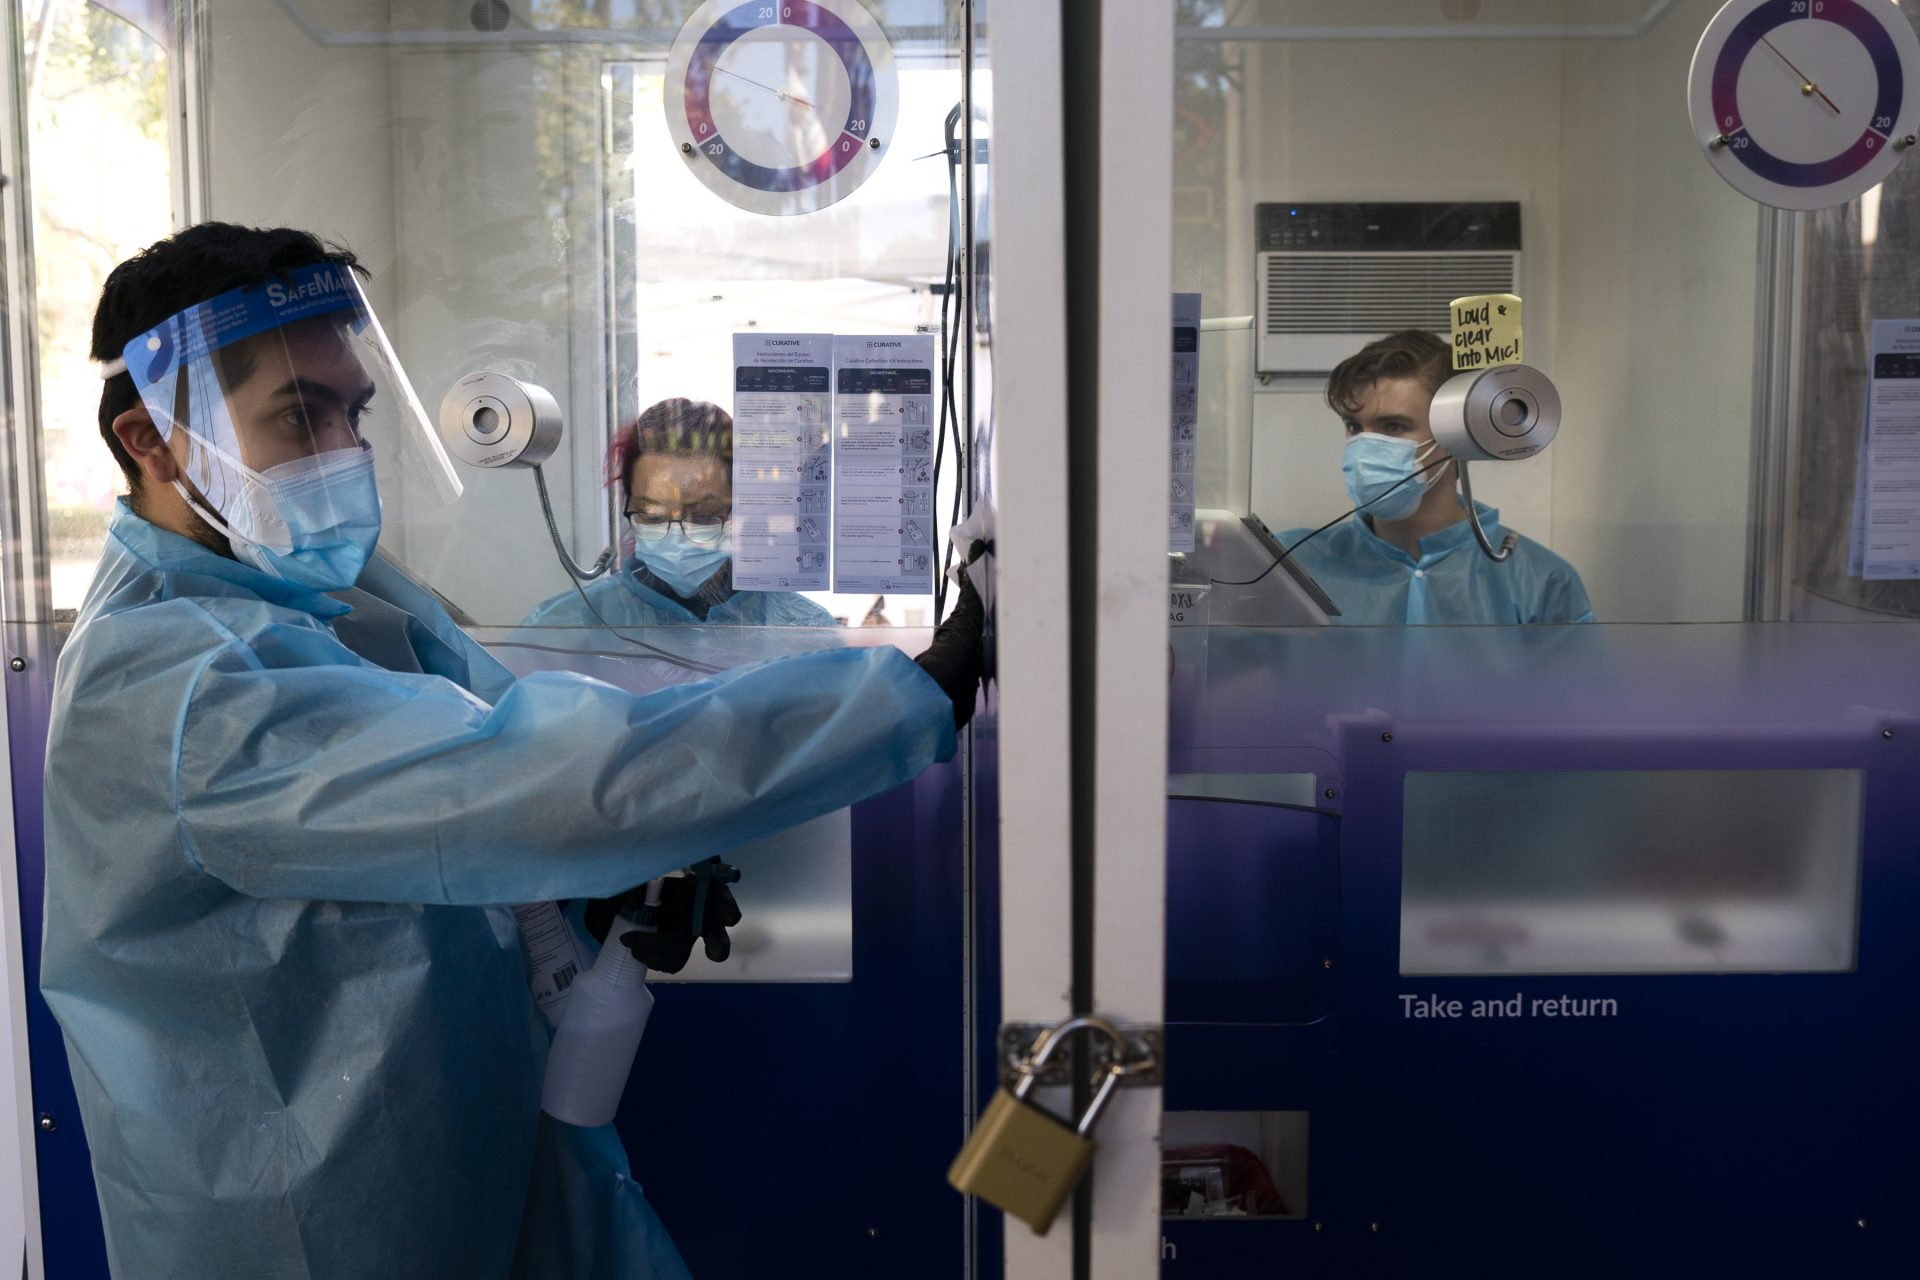 FILE PHOTO: In this Dec. 9, 2020, file photo, test specialist Elijah Sanchez disinfects a testing booth at a COVID-19 testing site in Los Angeles.